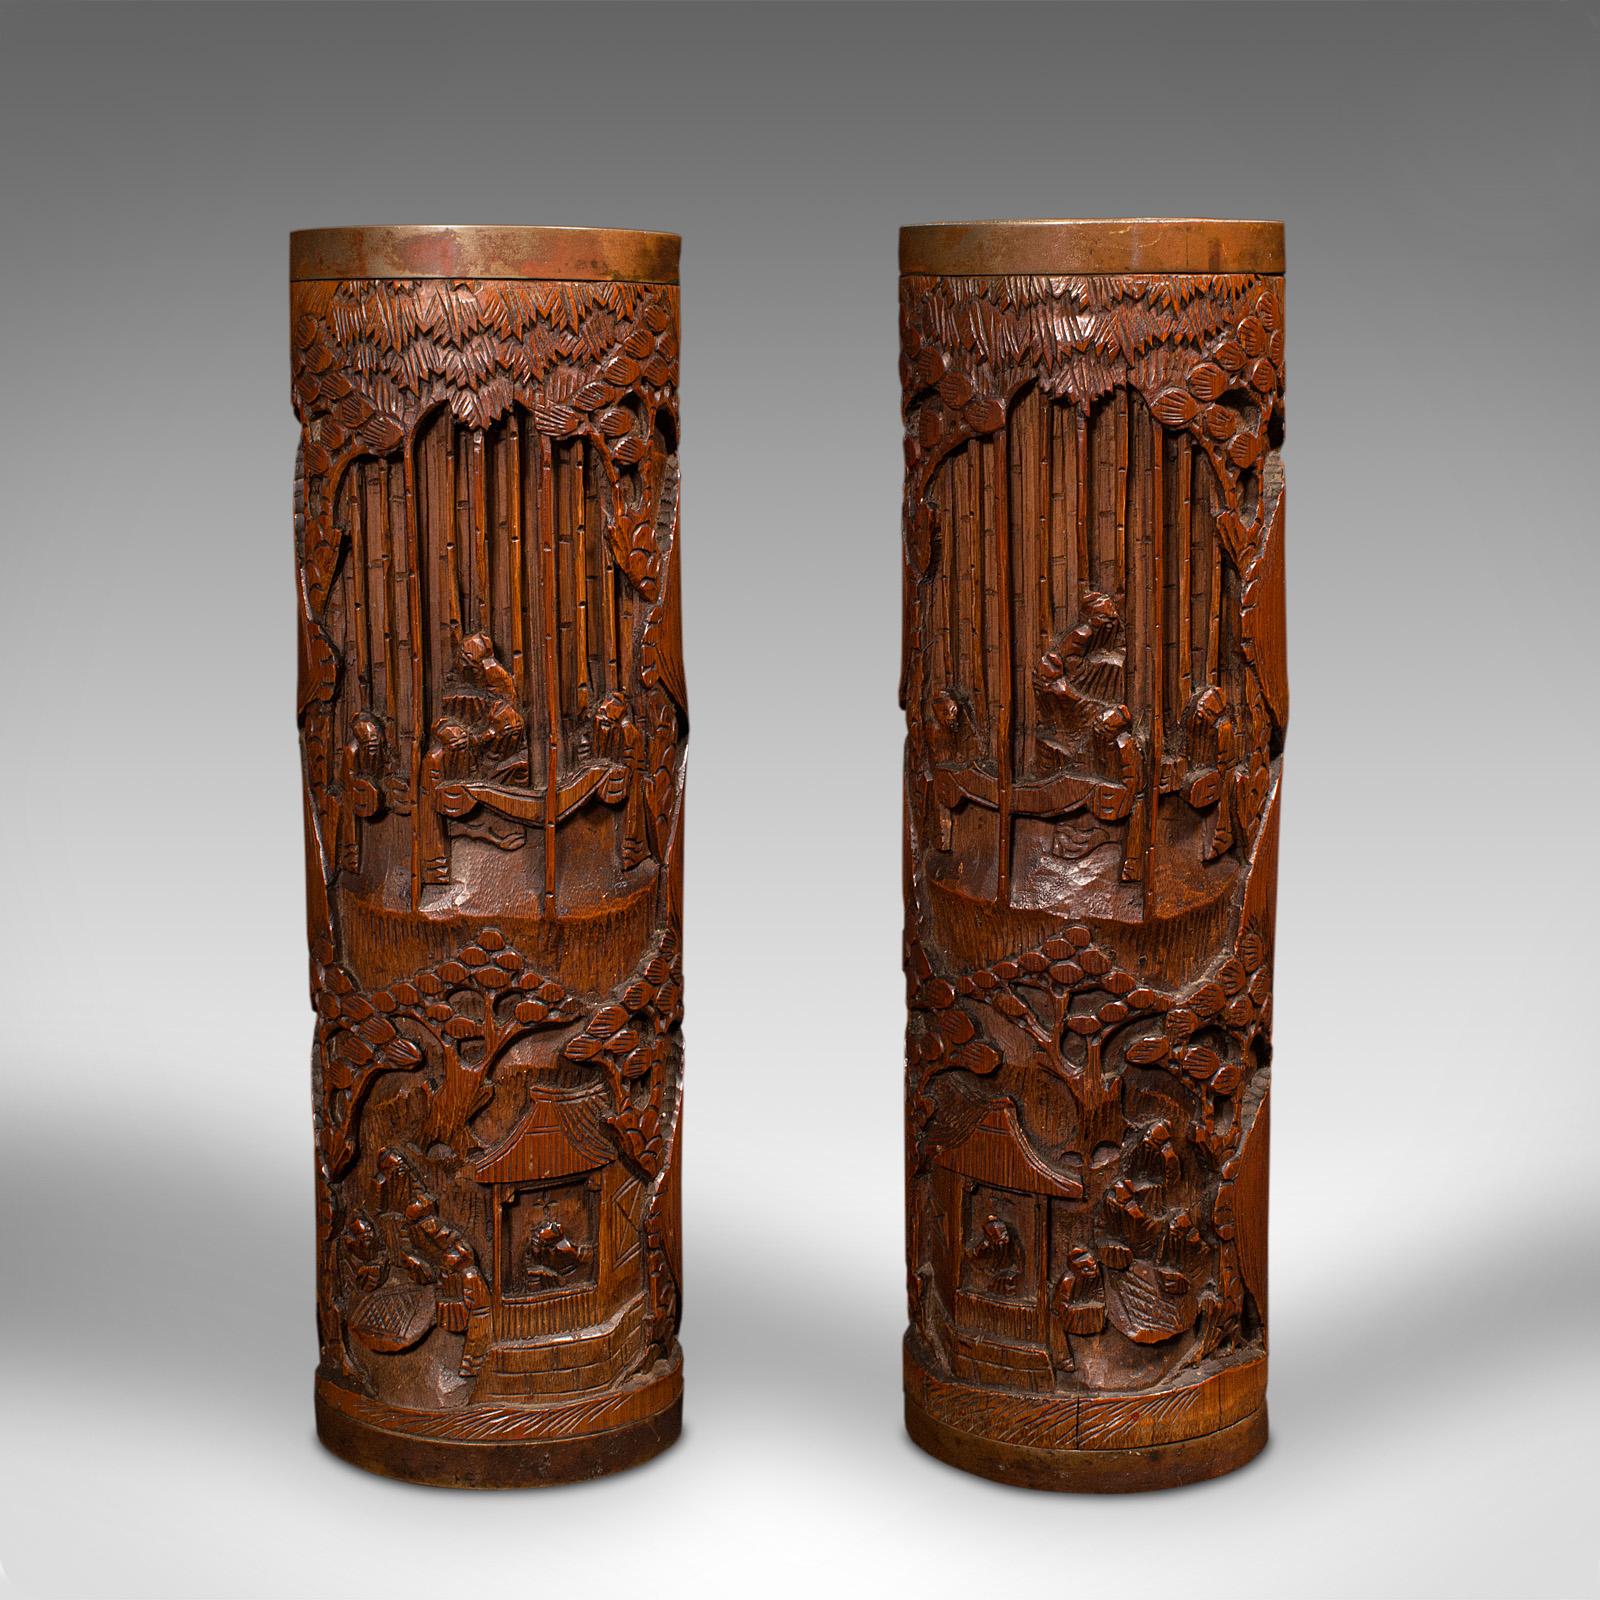 This is a large pair of antique dry flower vases. A Chinese, hand-carved bamboo stem sleeve or brush pot, dating to the late Victorian period, circa 1900.

Superb bitong or traditionally carved brush pots, ideal for dry flower